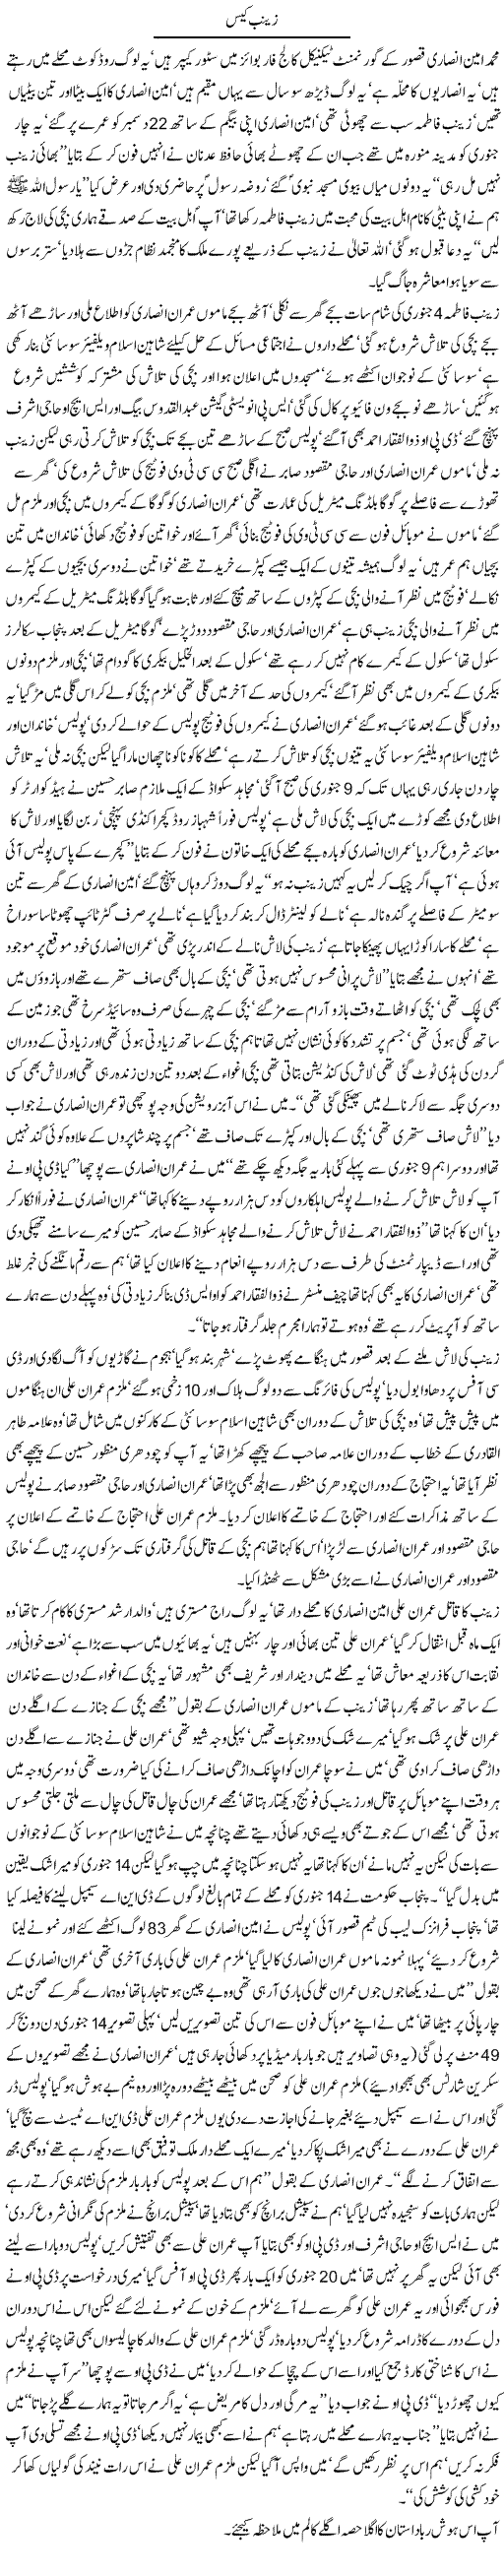 Zainab Case By Javed Chaudhry